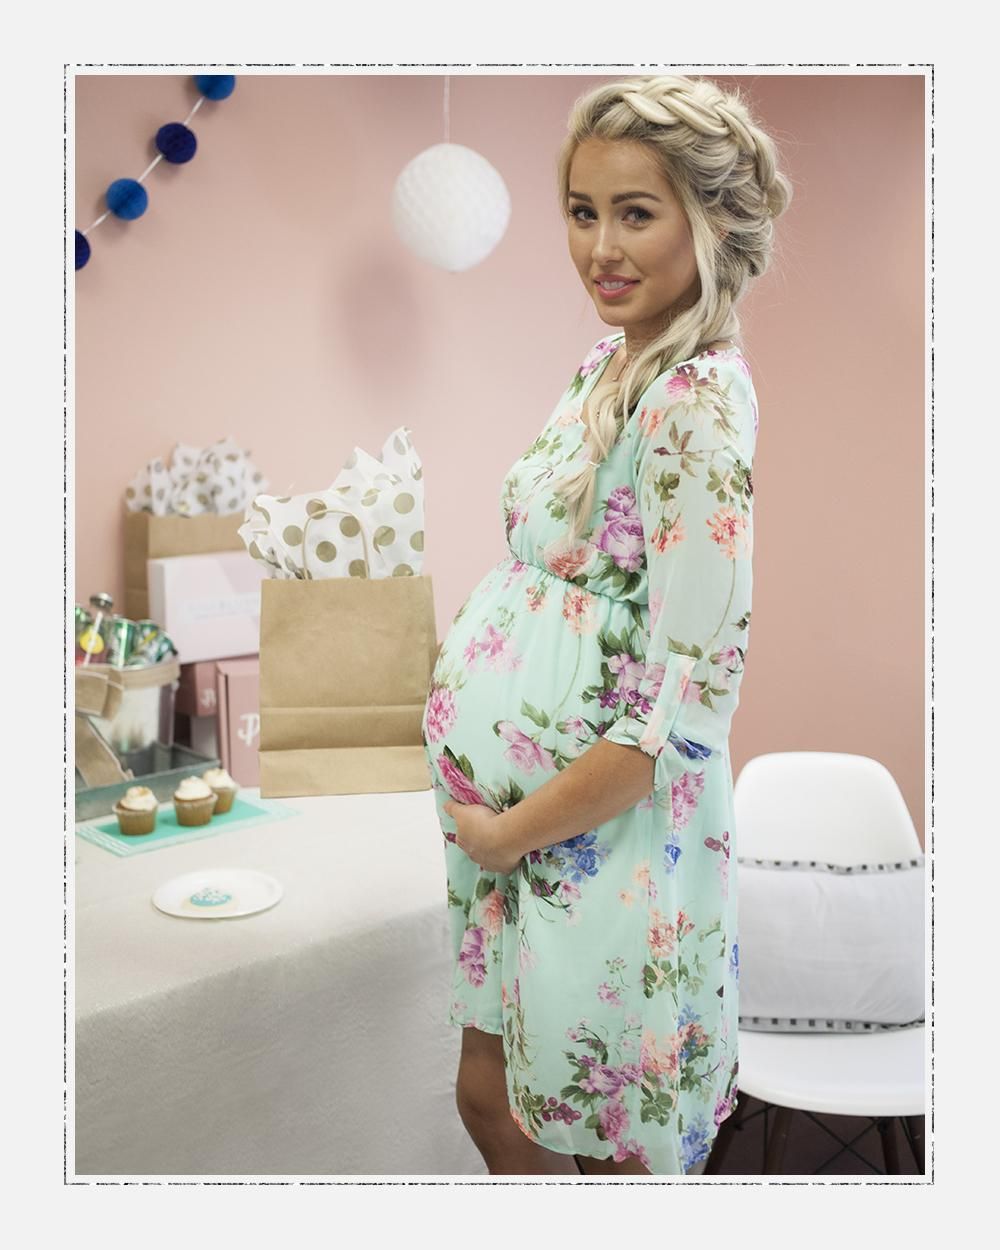 Full Size of Baby Shower:baby Shower Dresses Indian Maternity Maxi Dress Cheap Maternity Dresses For Baby Showers Trendy Maternity Clothes Maternity Gown Style Maternity Stores Near Me Plus Size Maternity Clothes Cheap Maternity Jeans